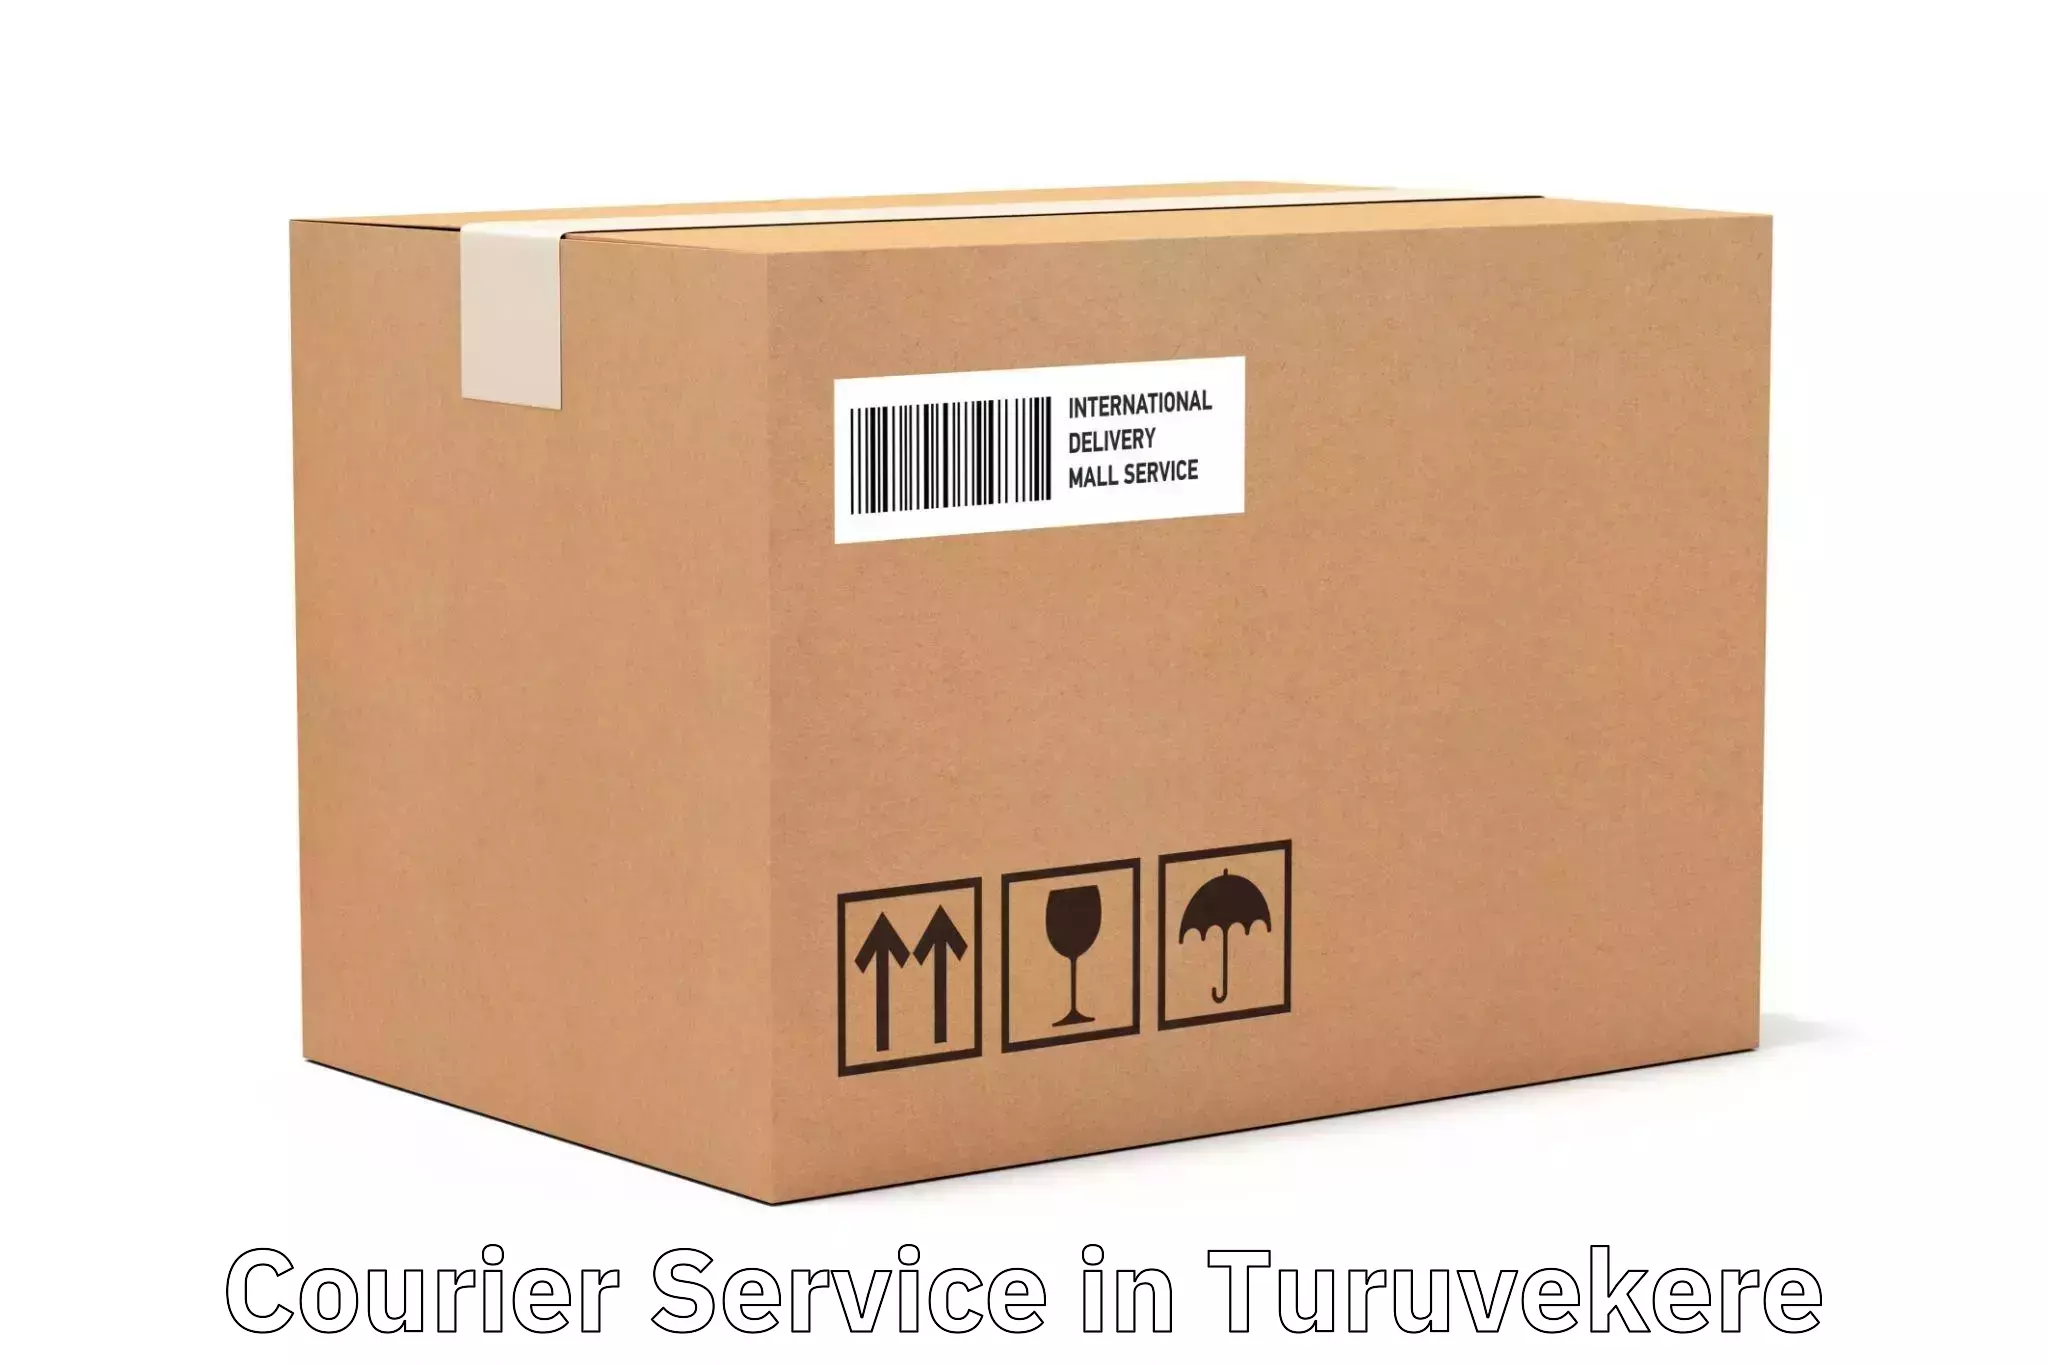 Quality courier partnerships in Turuvekere